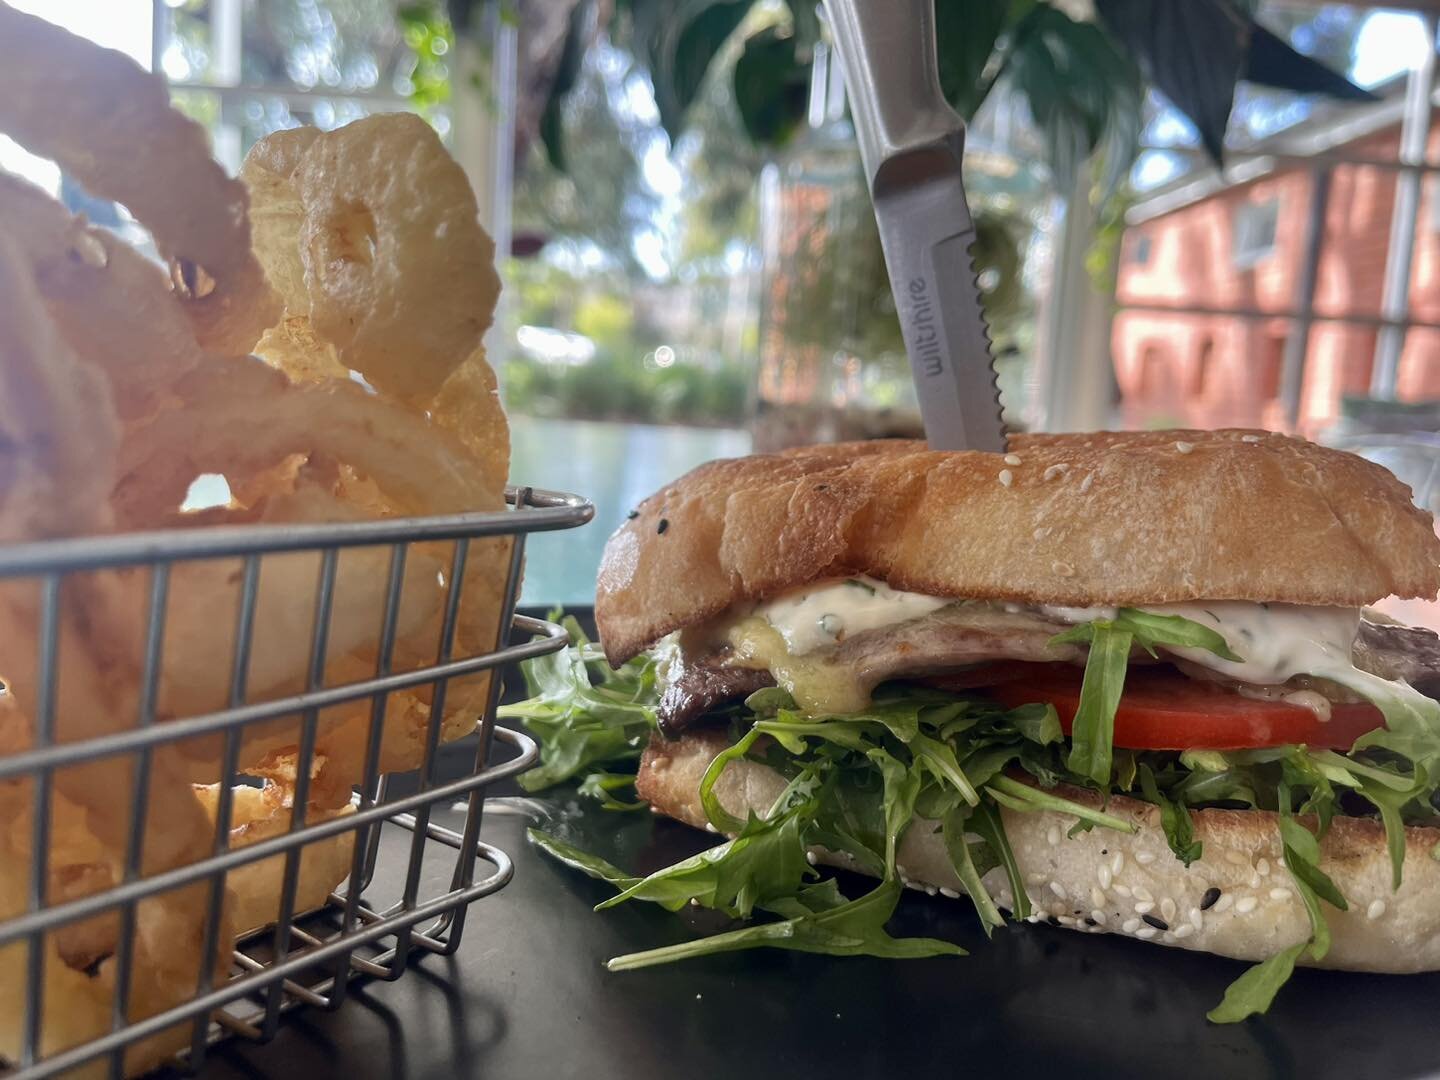 This weeks specials are sure to satisfy the gluttonous or the whole food eaters

Eye Fillet Steak Sandwich
- Grilled eye fillet steak with melted cheese, rocket, tomato, barbecue sauce and herb aioli. With a side of onion rings

Healthy Harvest Veget